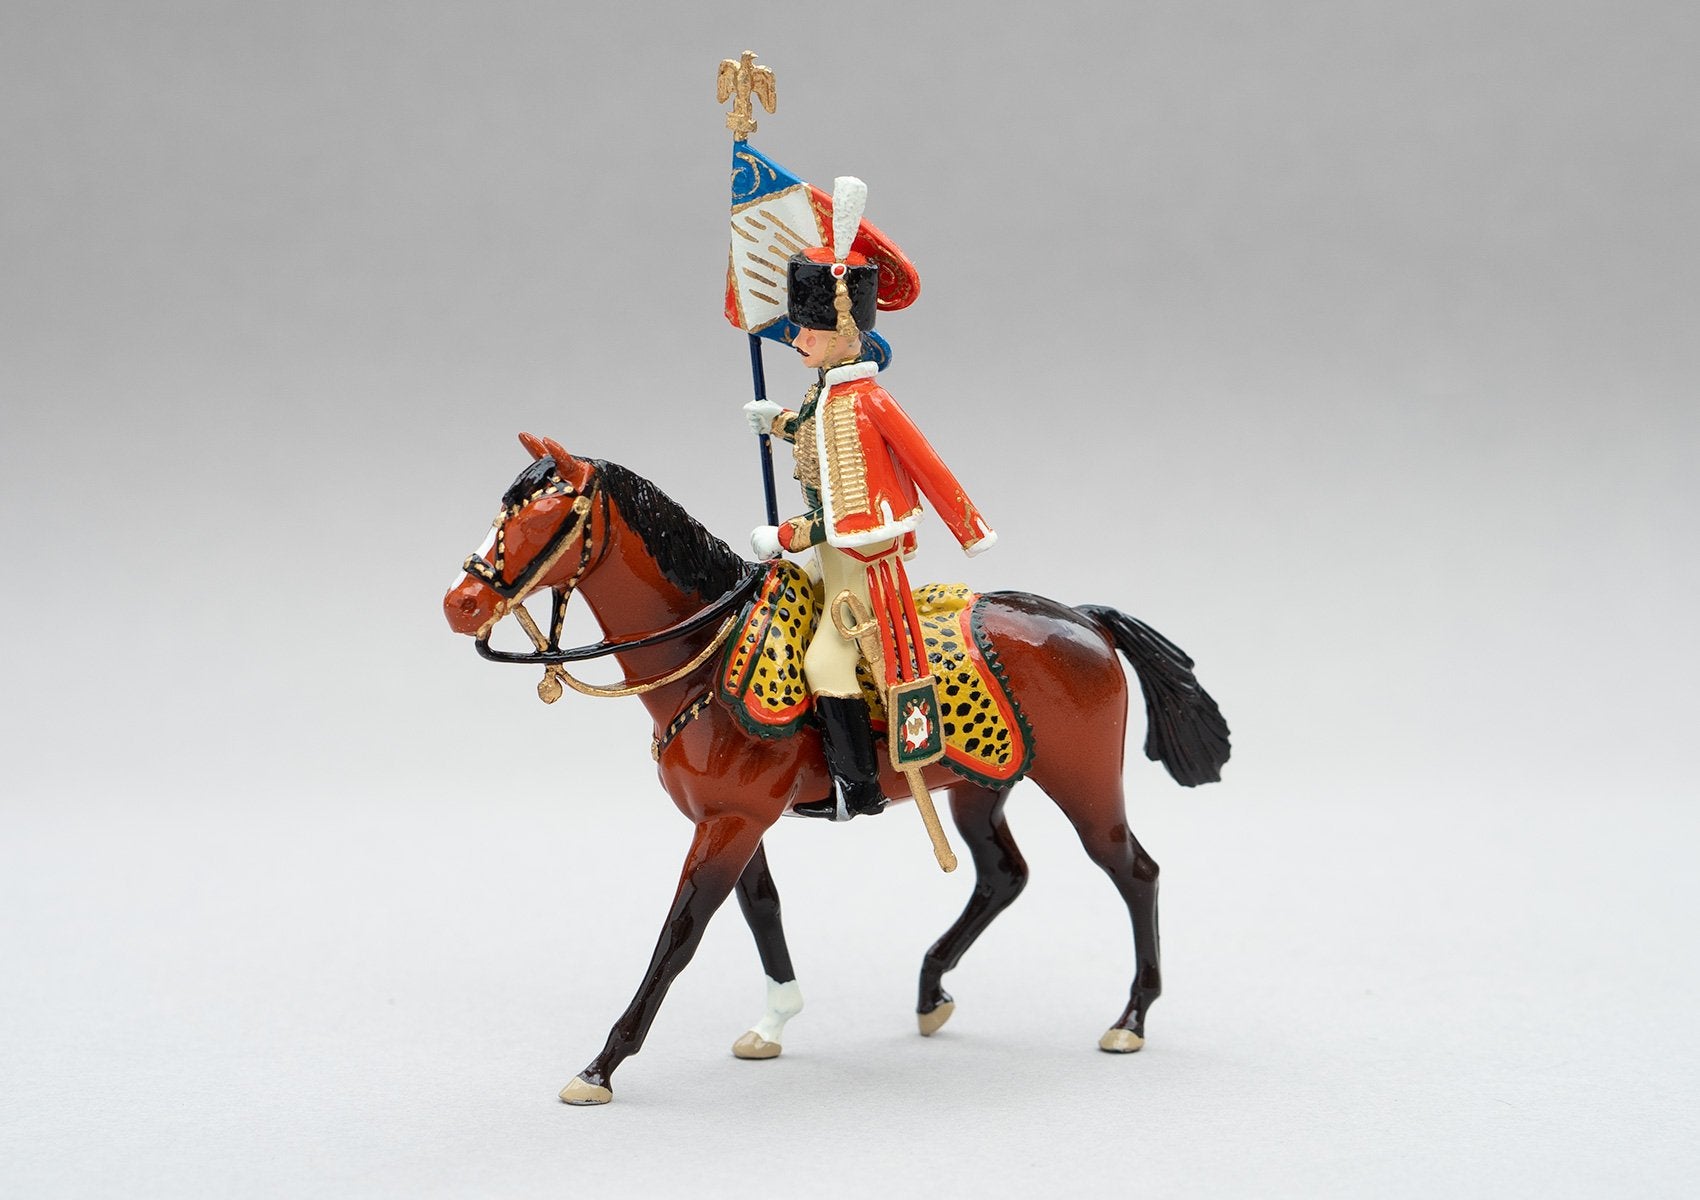 Set 97 Chasseurs à Cheval, Standard Bearer | French | Napoleonic Wars | Single mounted figure on bay horse | Waterloo | © Imperial Productions | Sculpt by David Cowe